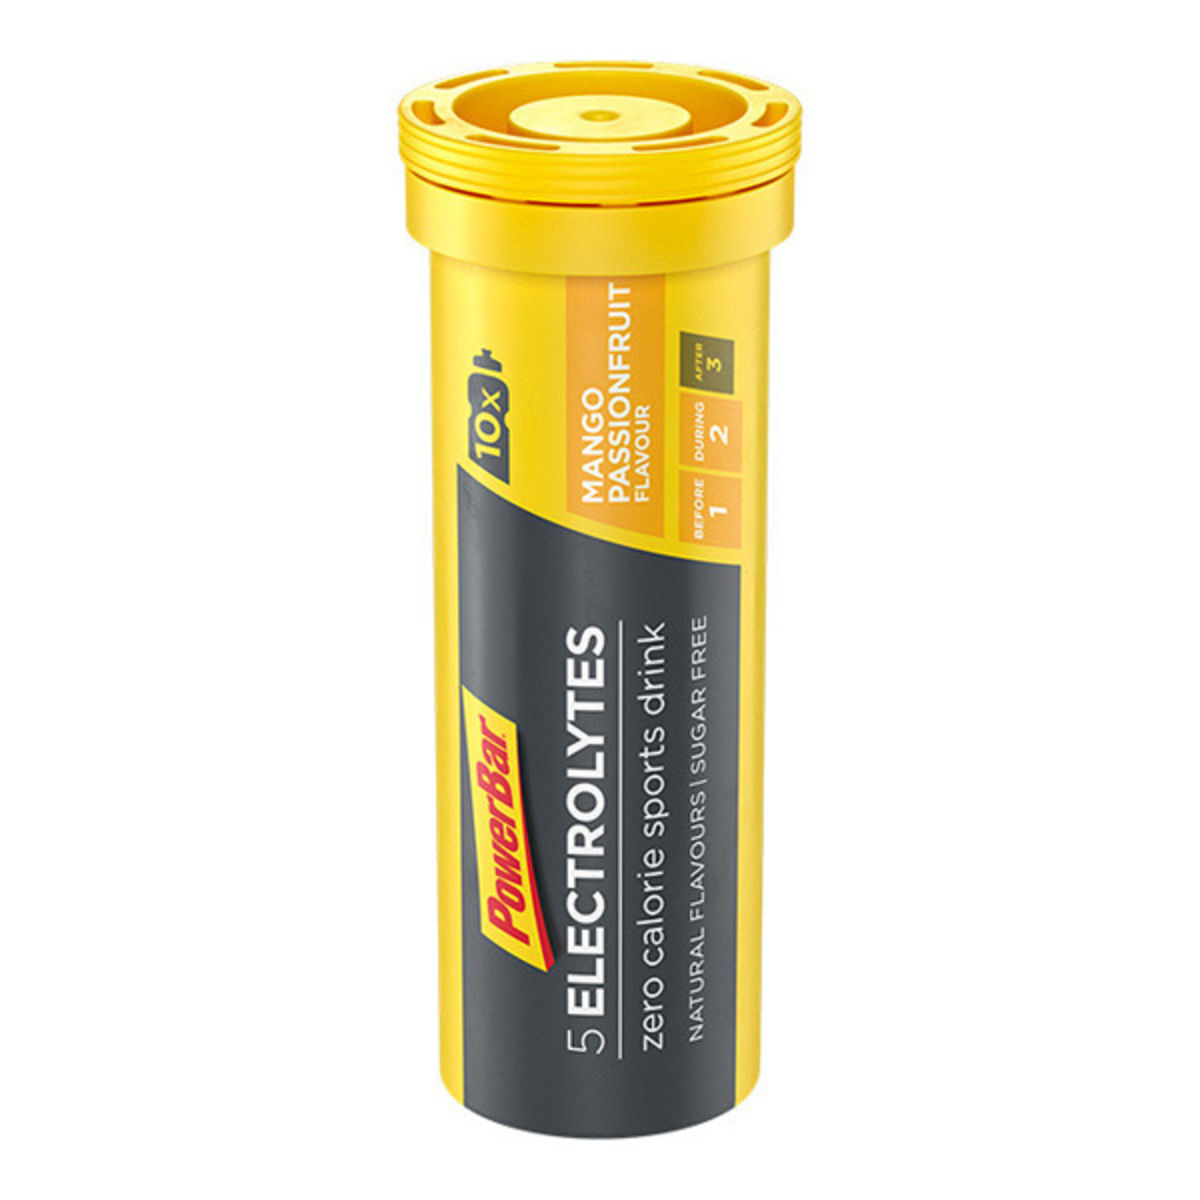 Powerbar electrolyte drink tablets - Mango, passionfruit